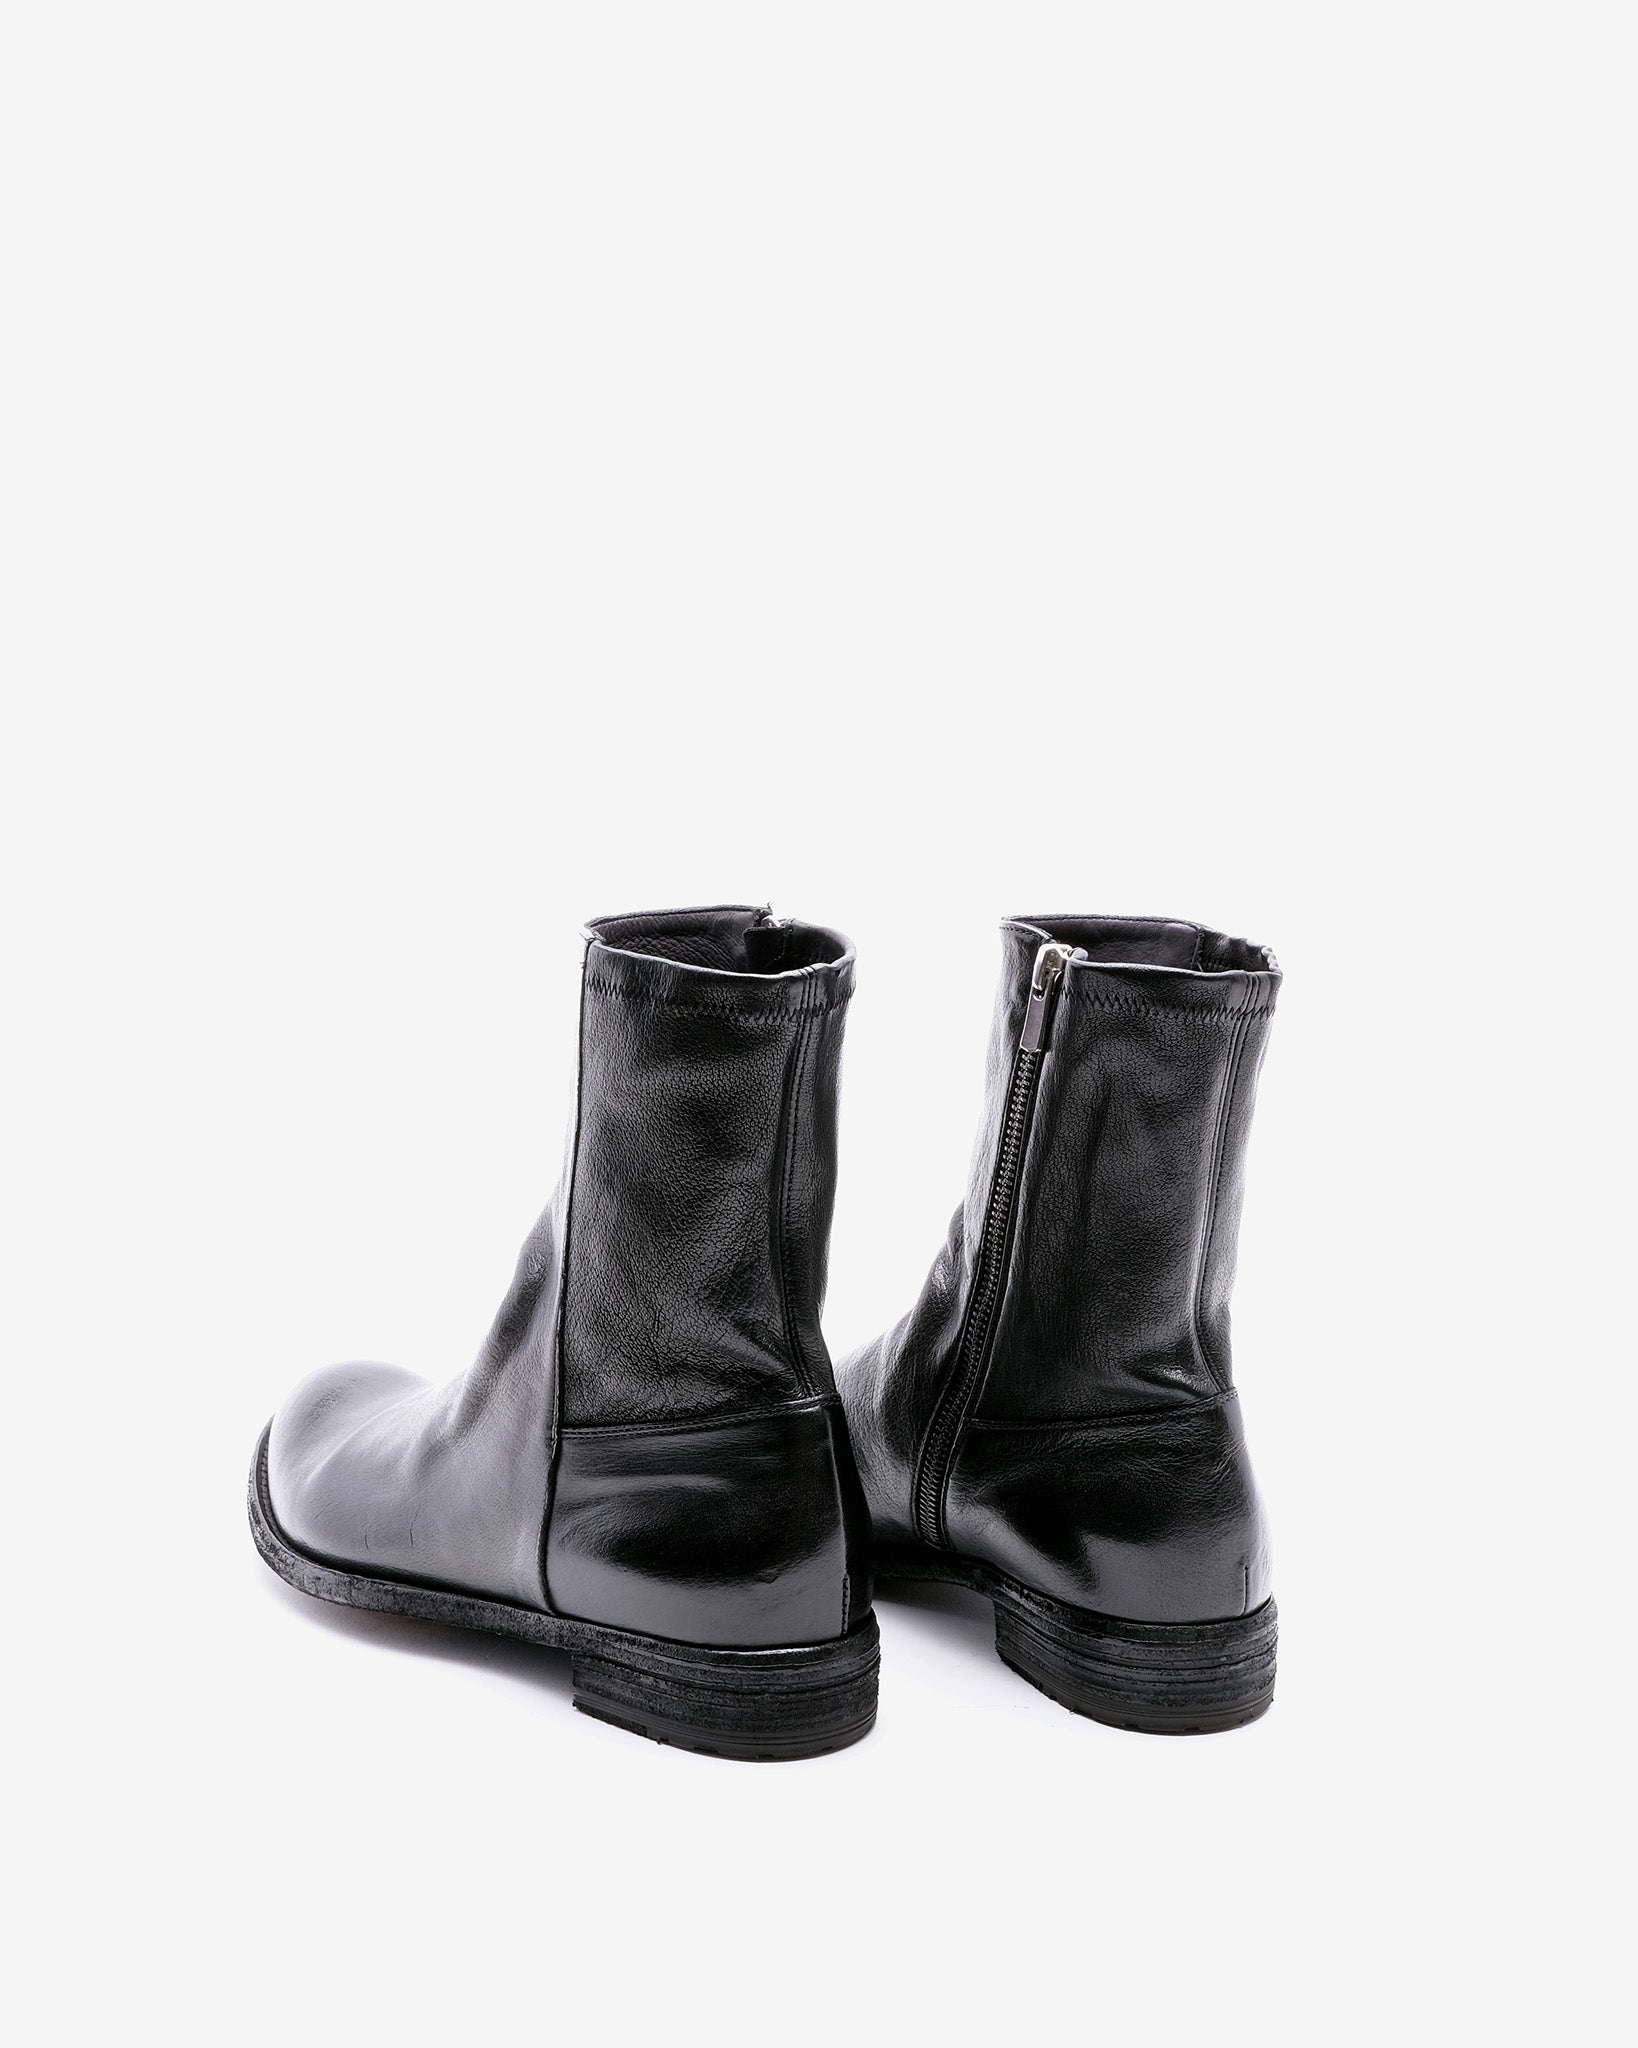 Lexikon 135 Ignis Stretch T. Nero Leather Boots